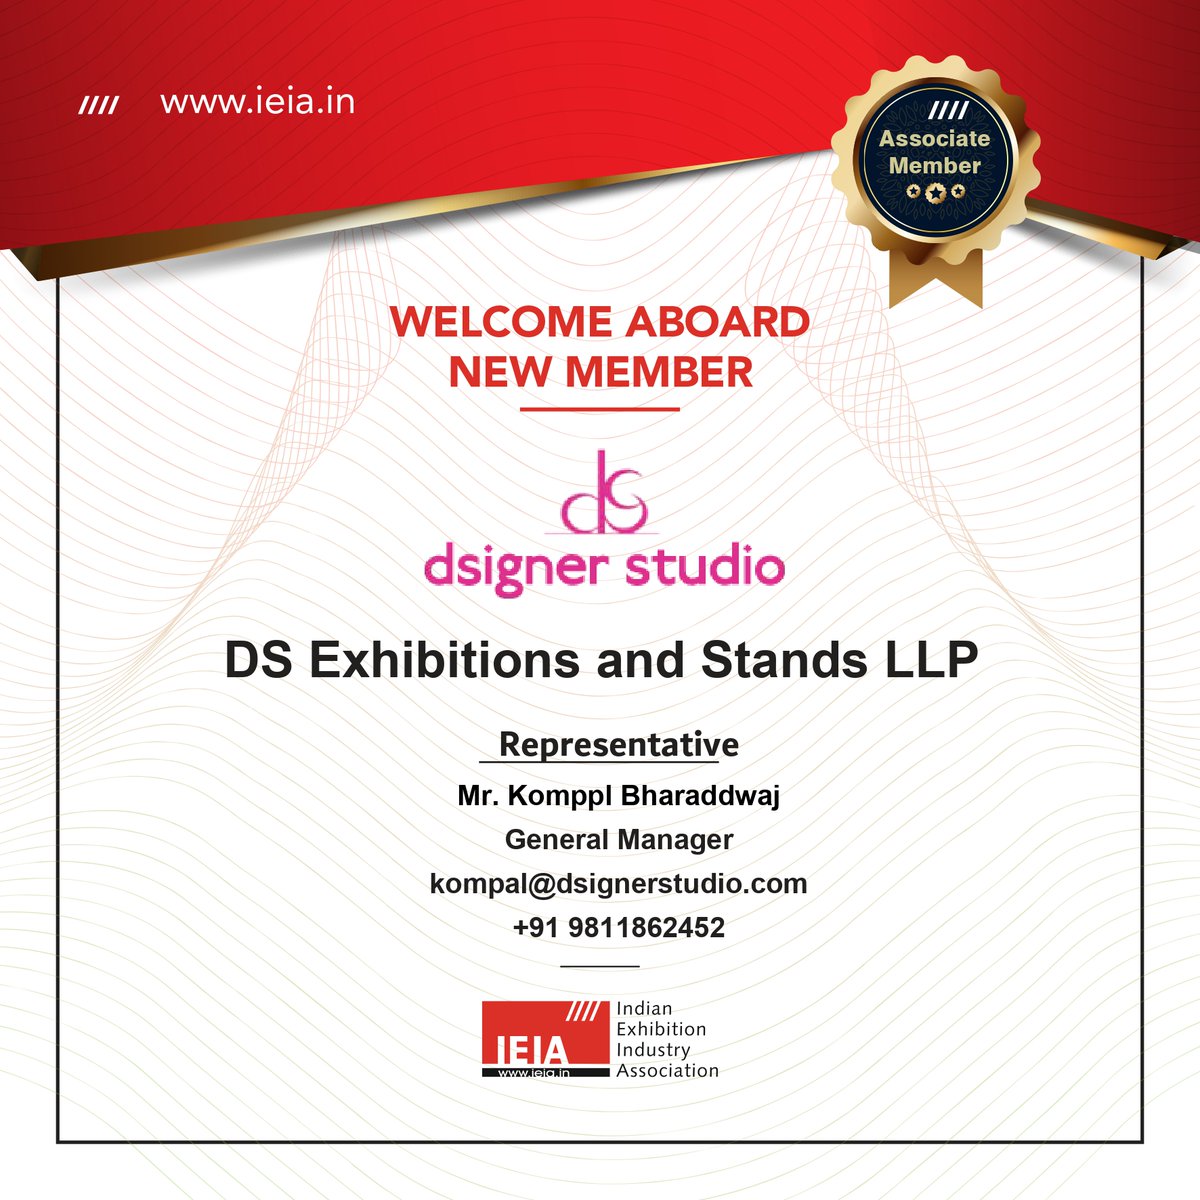 #IEIA welcomes aboard New Associate Member: @DS Exhibitions and Stands LLP For more details: dsignerstudio.com @dsigner_studio #DSExhibitionsandStandsLLP #WelcomeAboard #WelcomeAboardNewMember #IEIA ♦Be an IEIA member today! Join Now!! lnkd.in/gejg-Jh